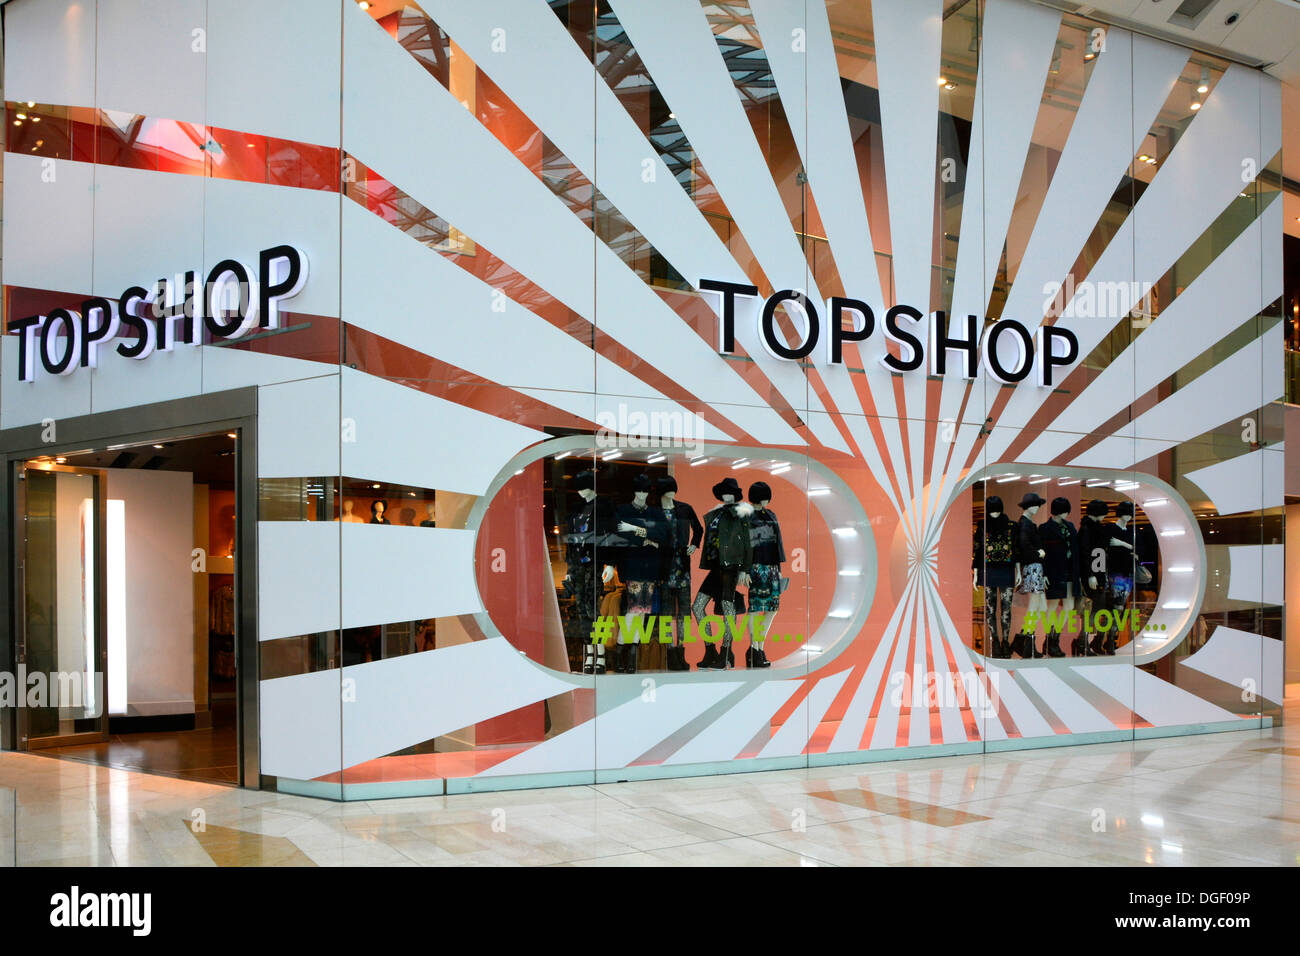 Topshop store in the Westfield indoor shopping malls Stock Photo